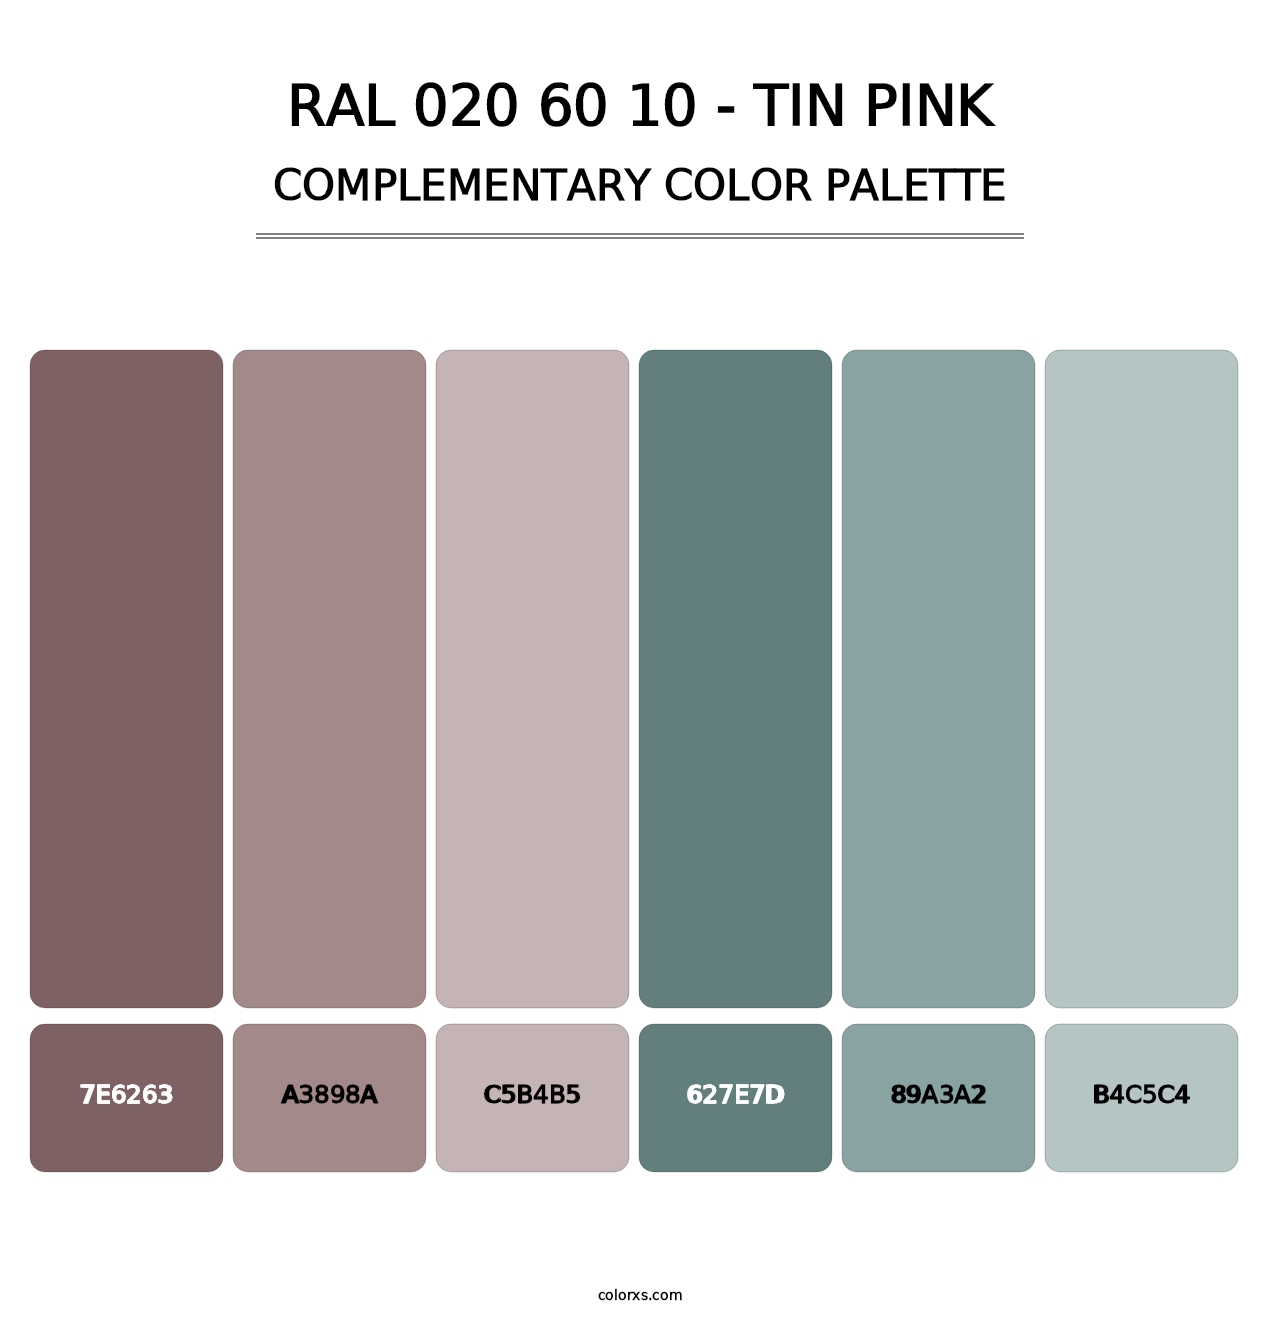 RAL 020 60 10 - Tin Pink - Complementary Color Palette